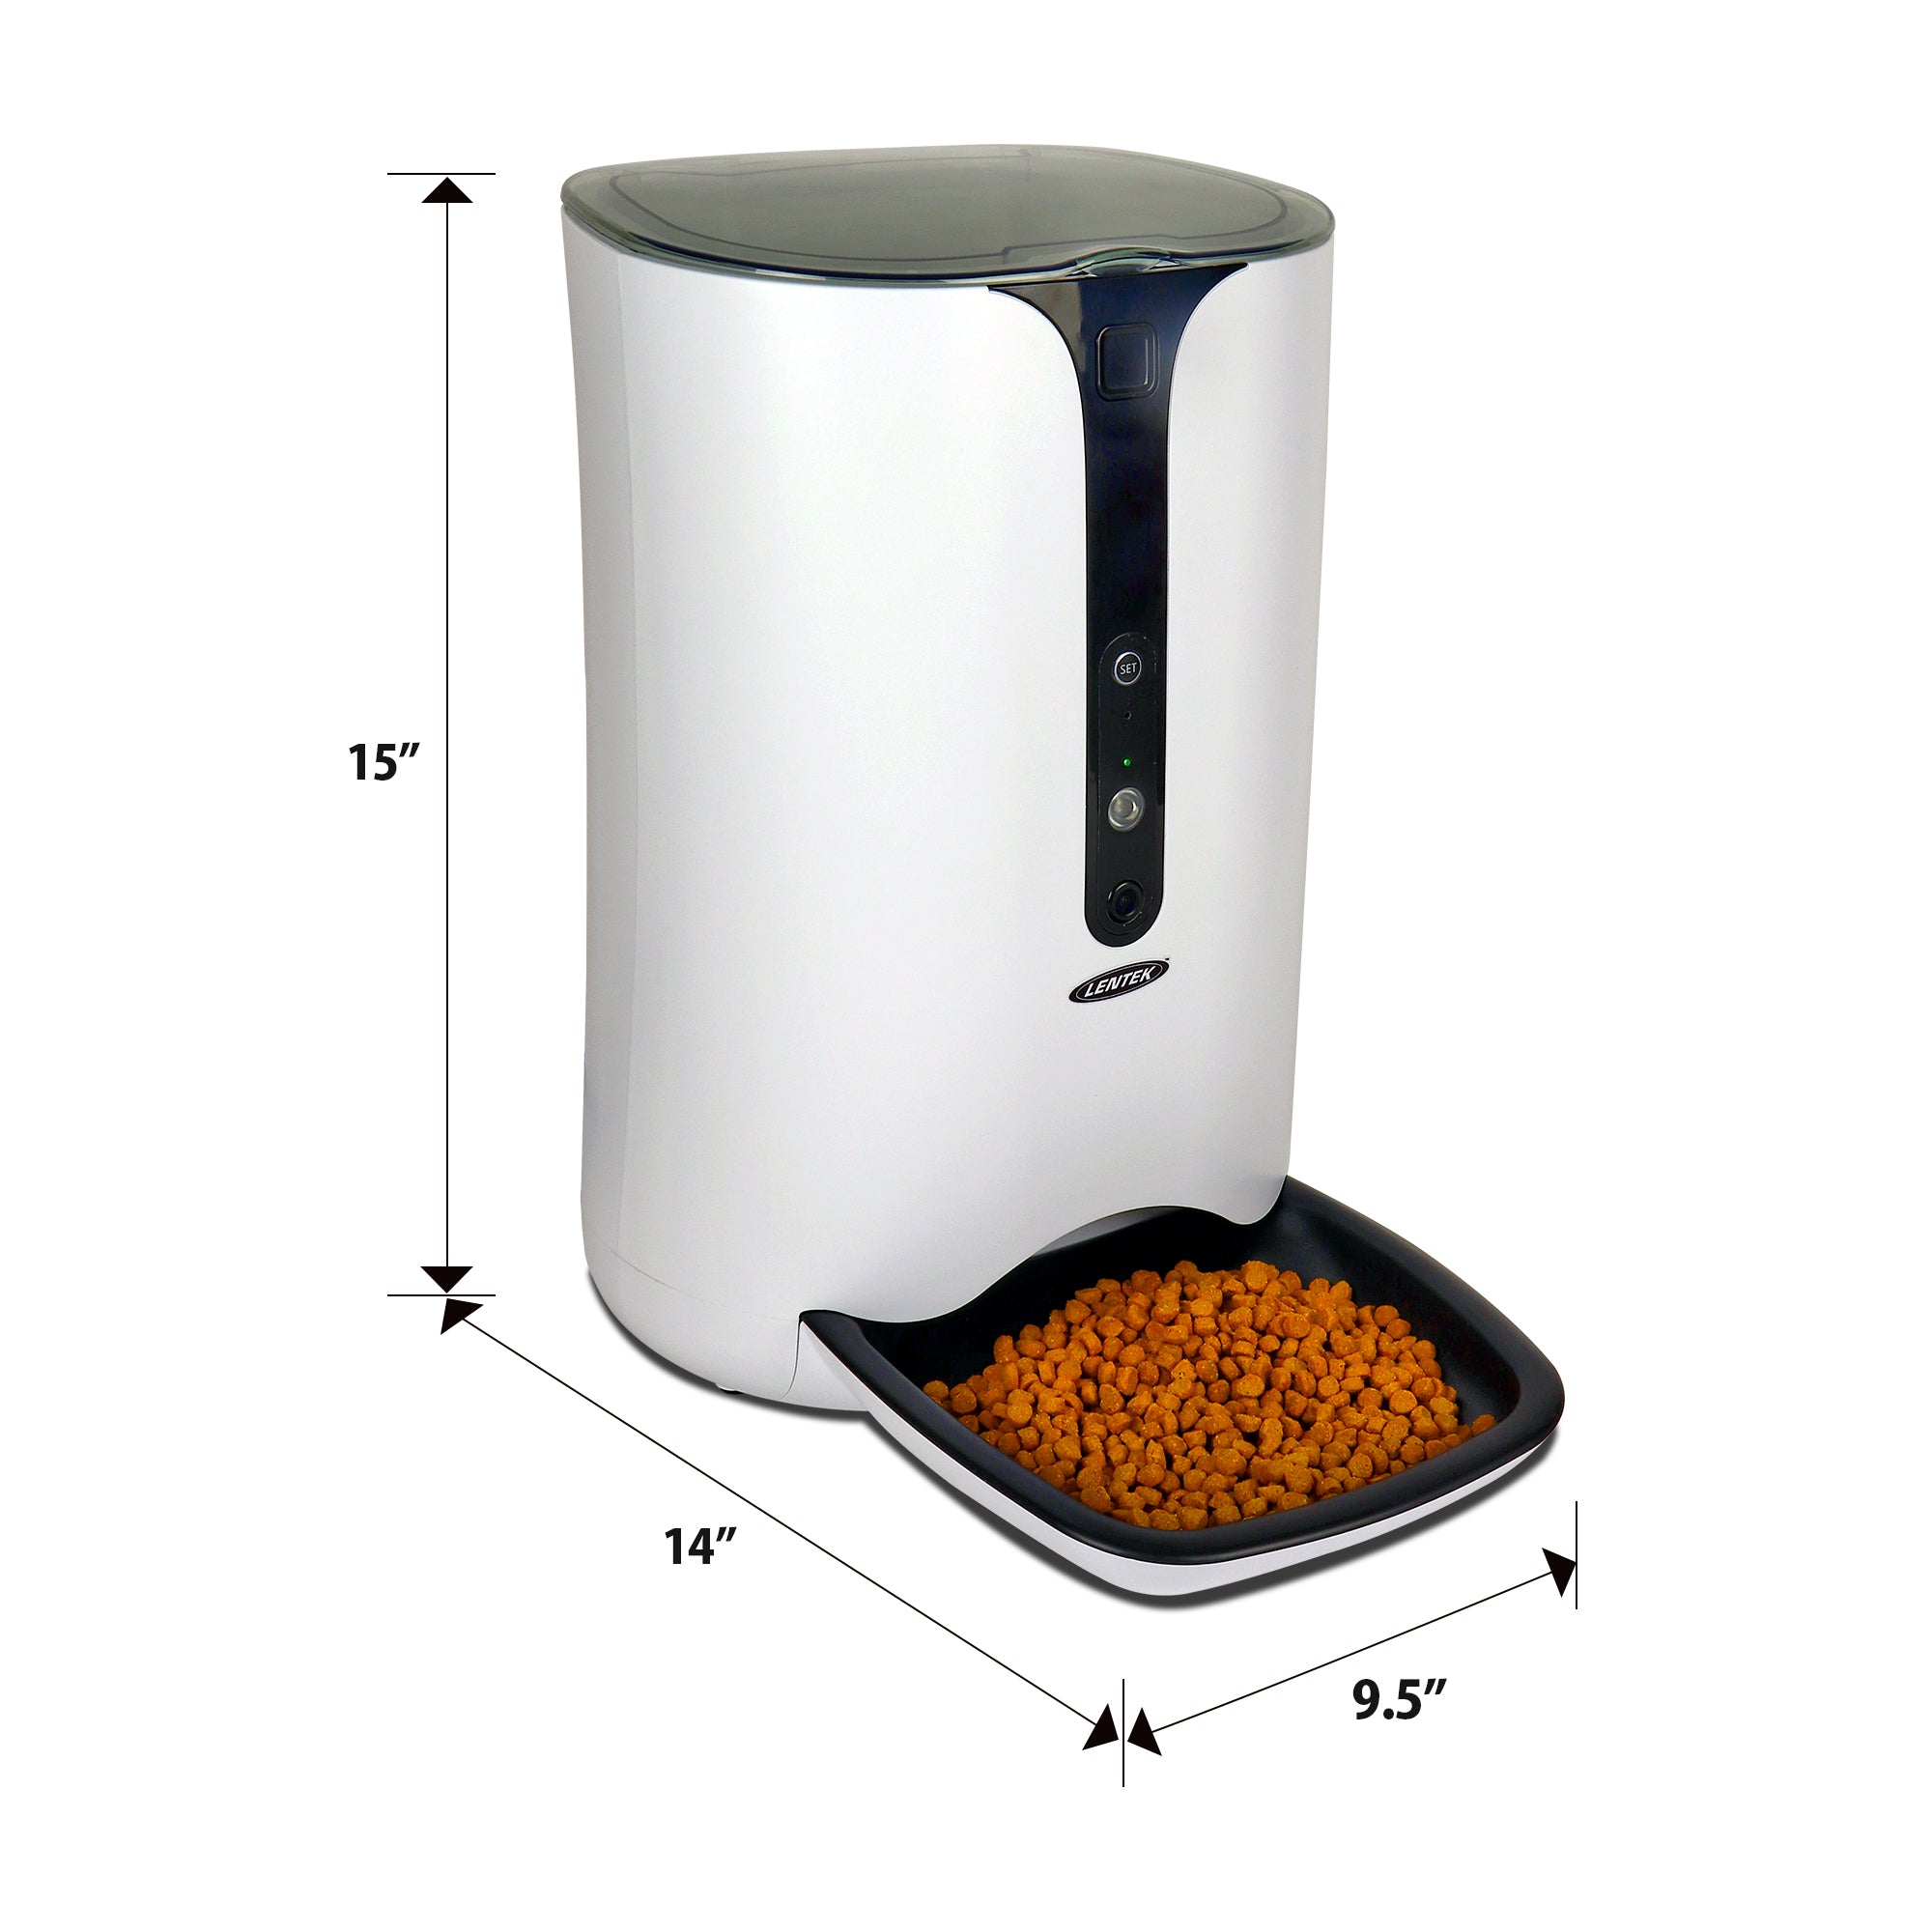 Product shot of Lentek smart programmable pet food dispenser with dry pet food in the feeding dish on a white background with dimensions labeled